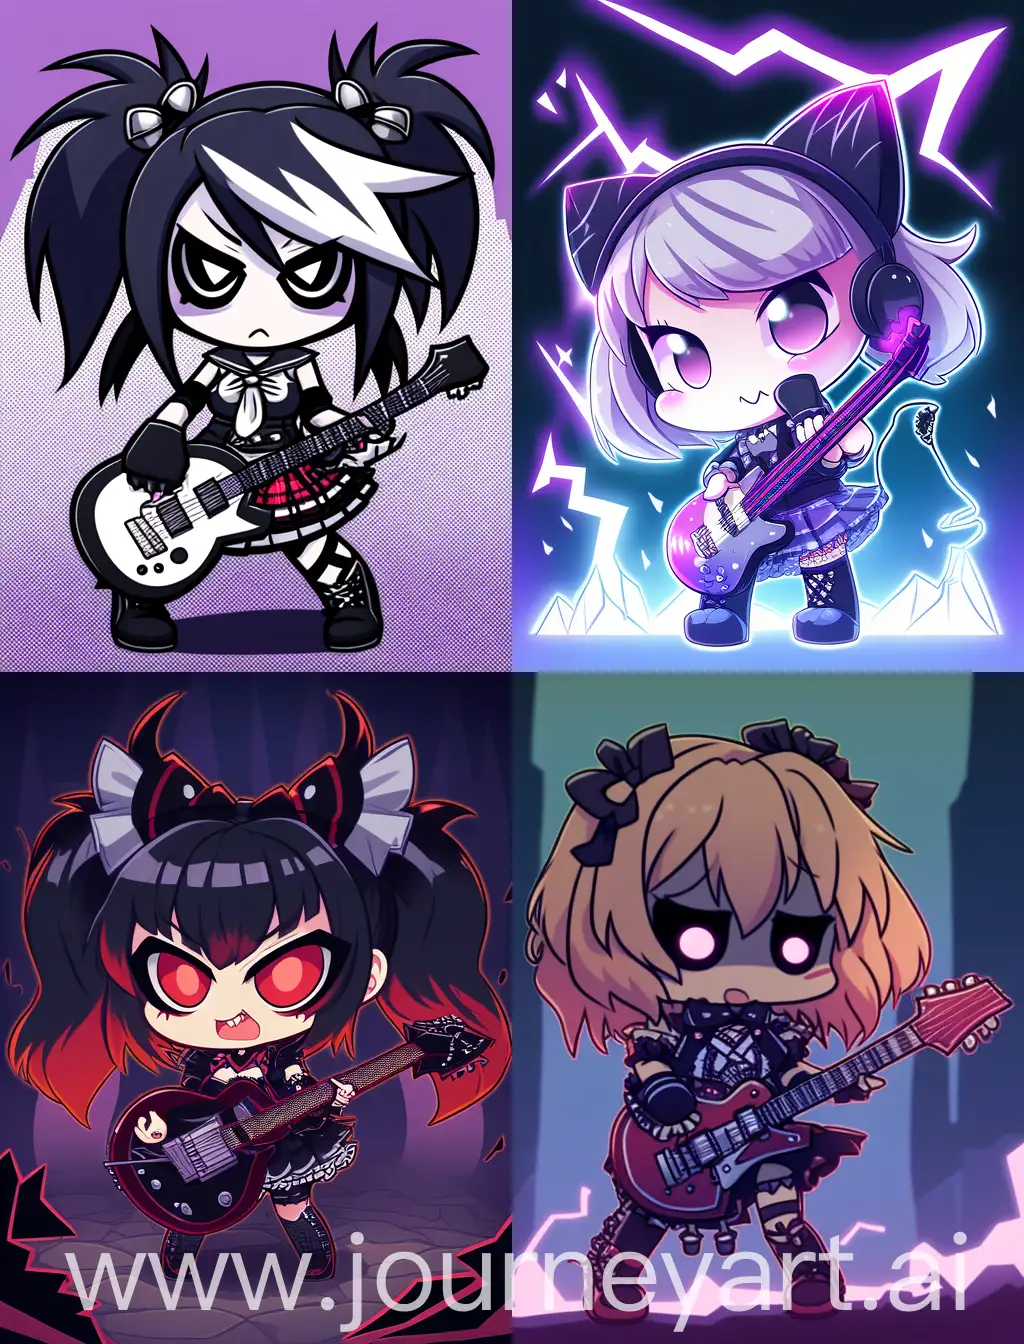 Chibi-Emo-Girl-Playing-Guitar-in-Cartoon-Anime-Style-with-Strong-Lines-on-Spooky-Background